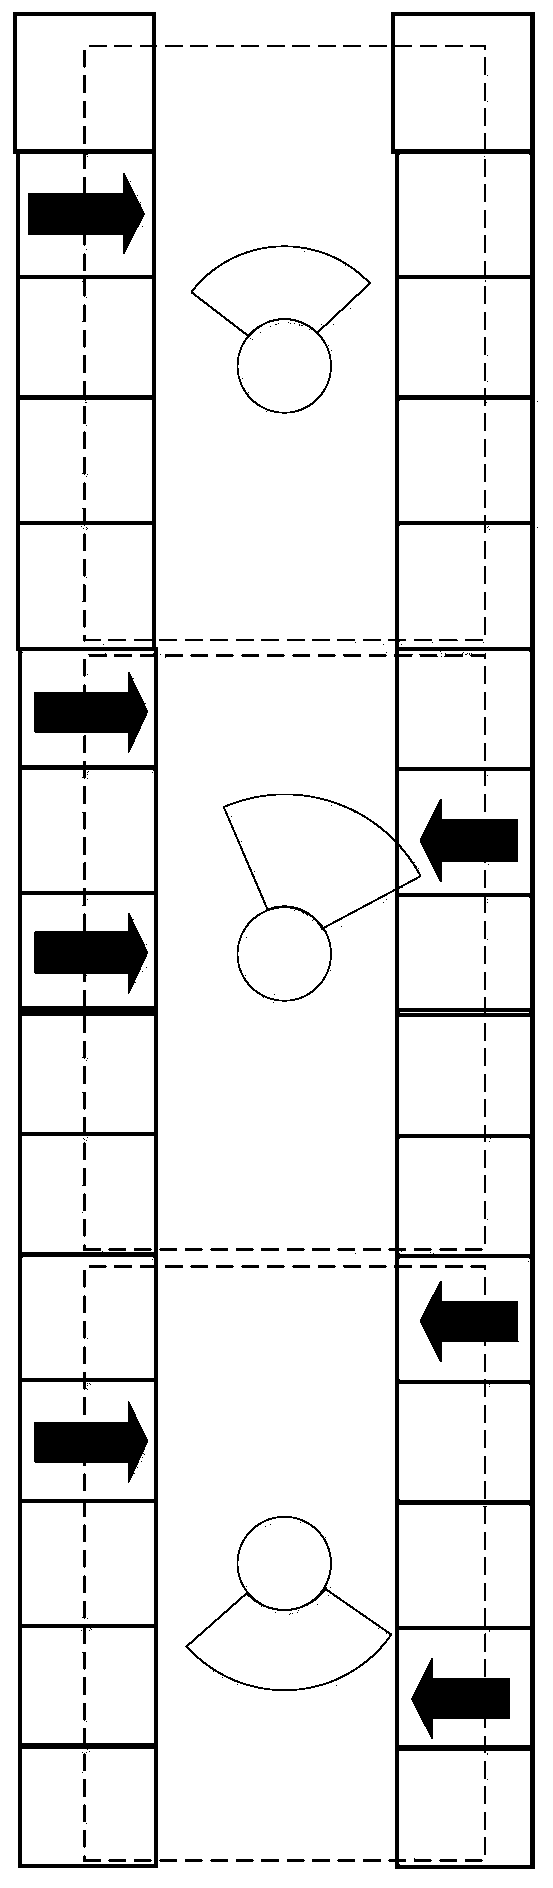 A parking space detection method based on the layout of shooting equipment